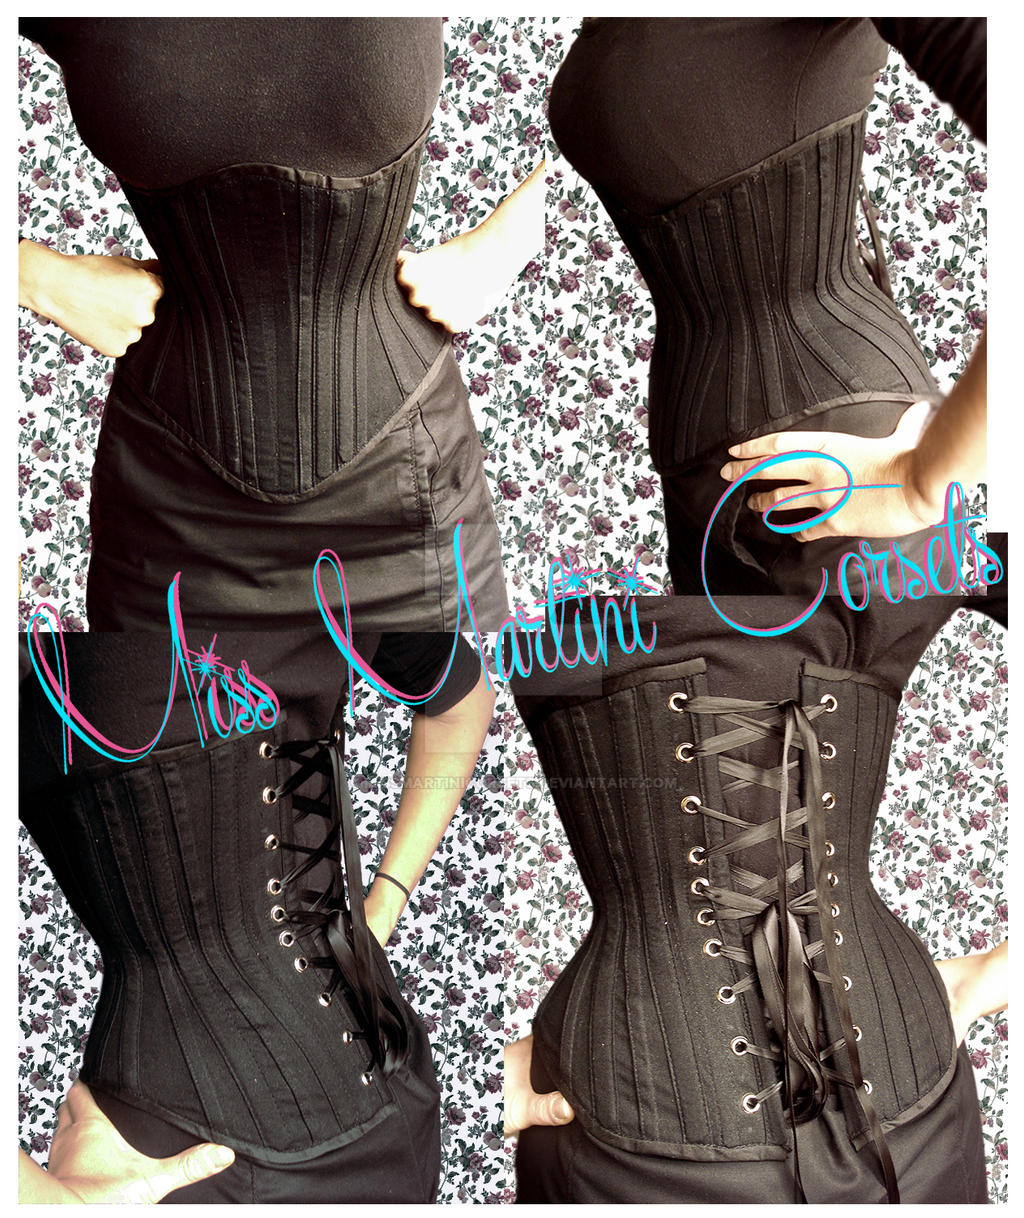 ♥♥ Tightlacing (also called corset training and waist training) is the  practice of wearing a tightl…